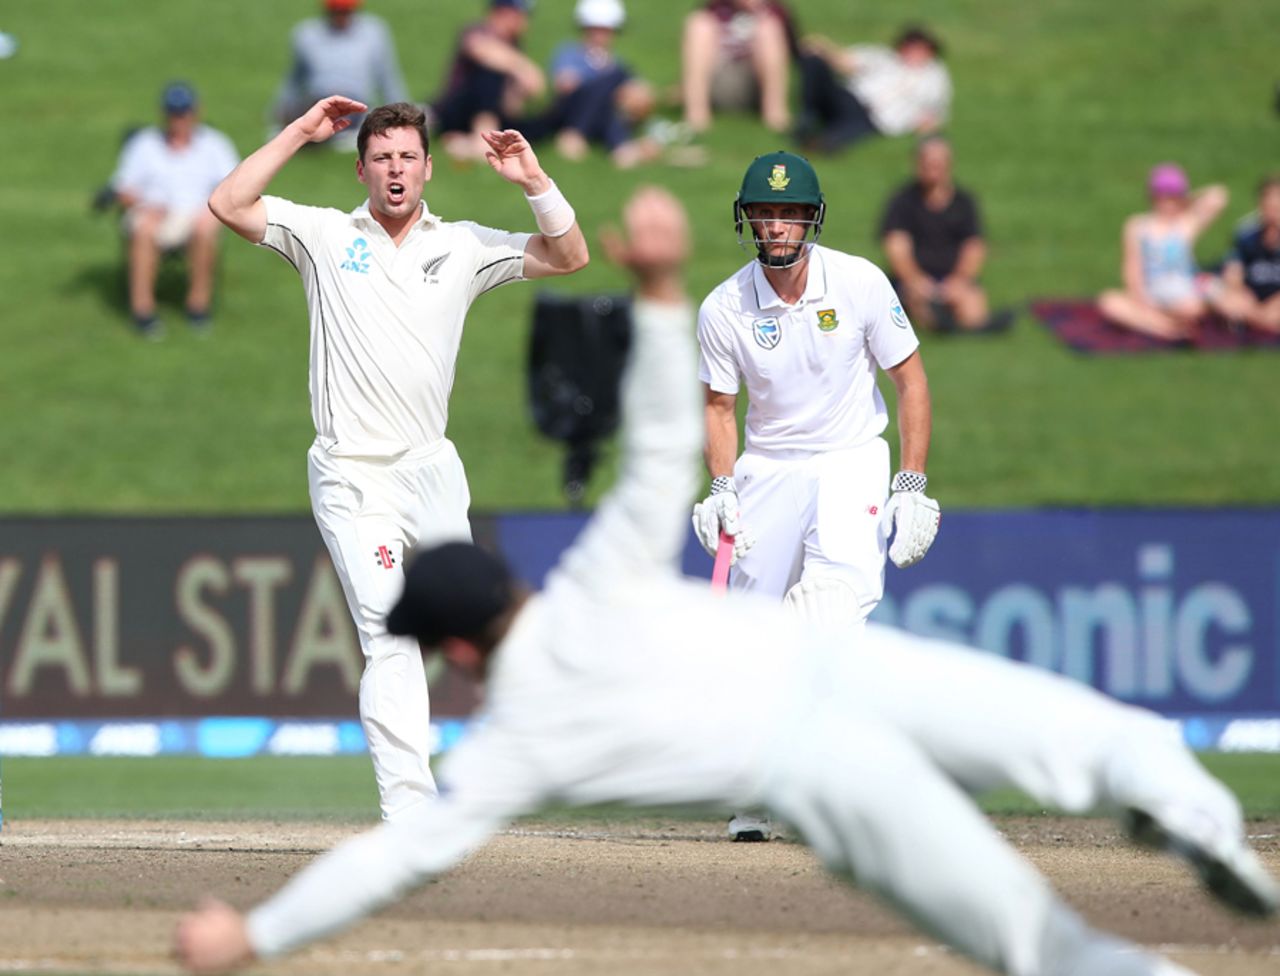 Matt Henry reacts after drawing an edge, New Zealand v South Africa, 3rd Test, Hamilton, 4th day, March 28, 2017